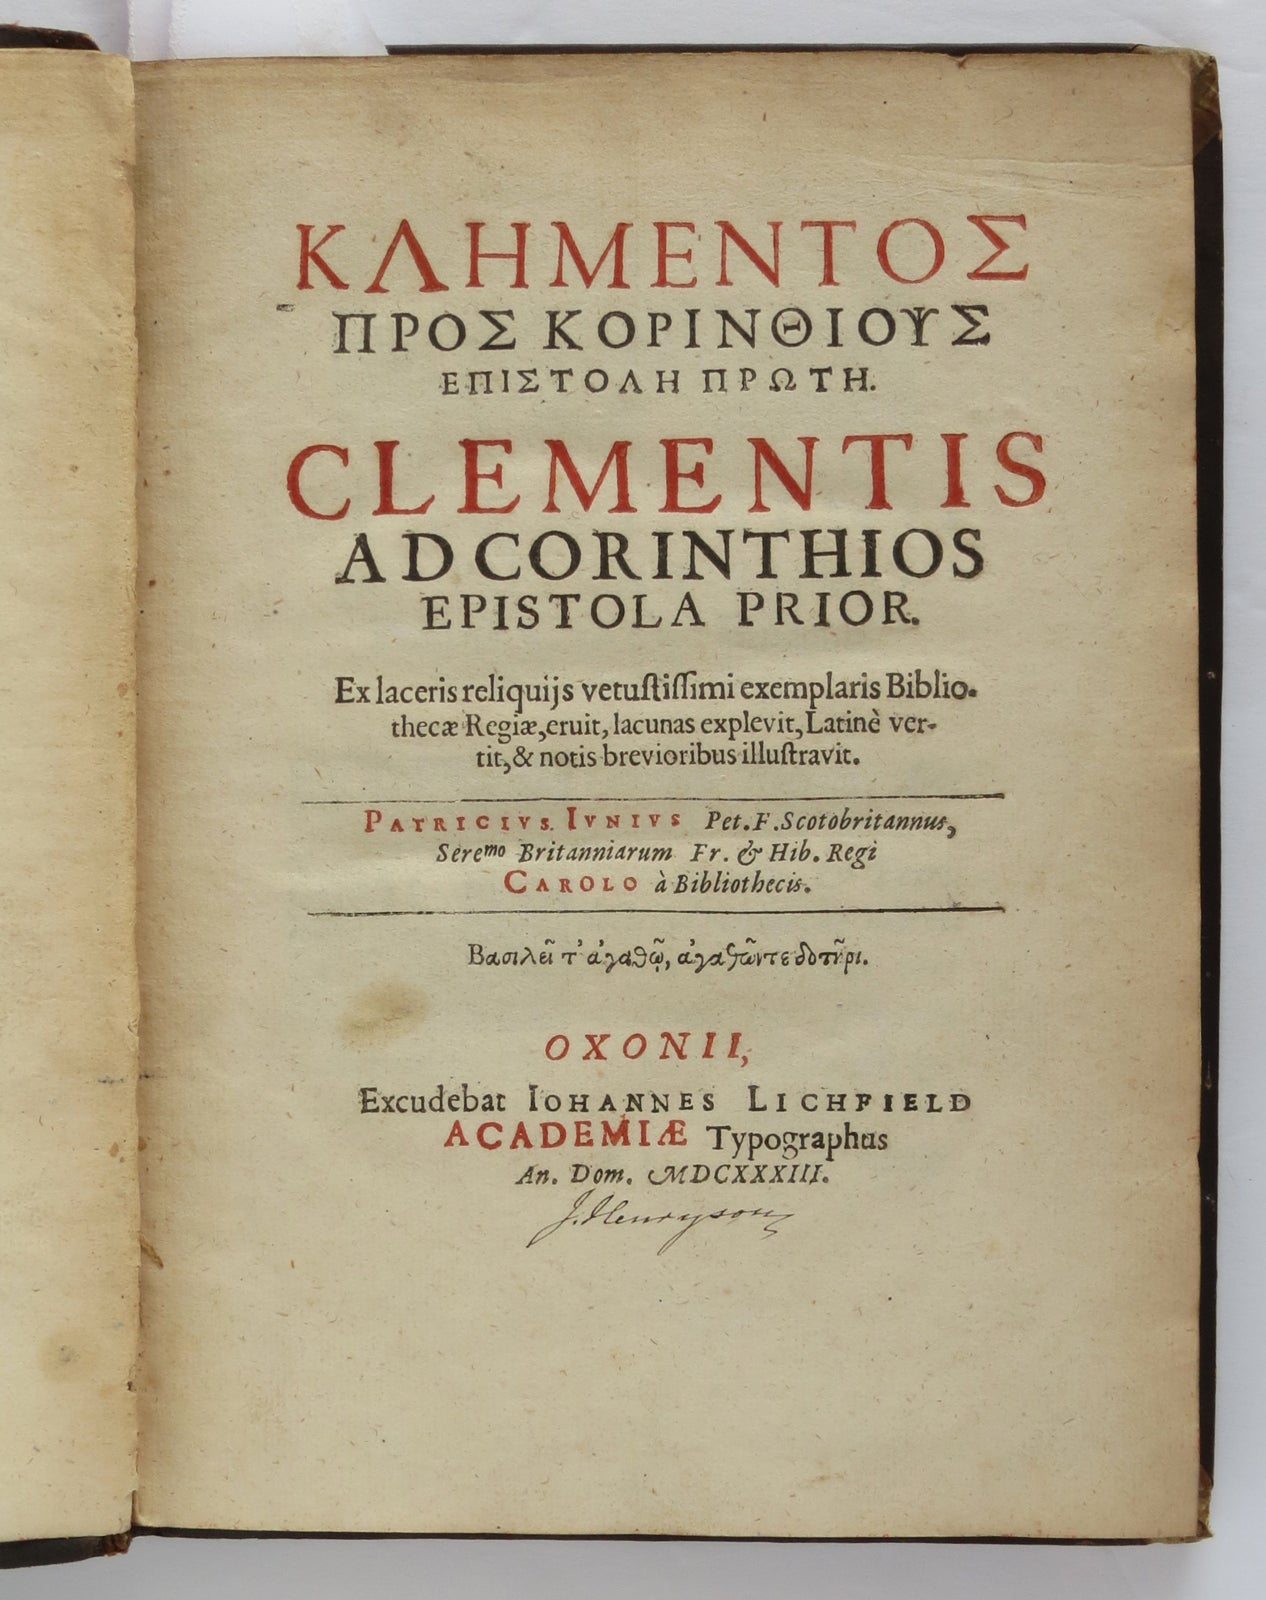 Title in Greek] Clementis ad Corinthios Epistola Prior. Pope Clement I